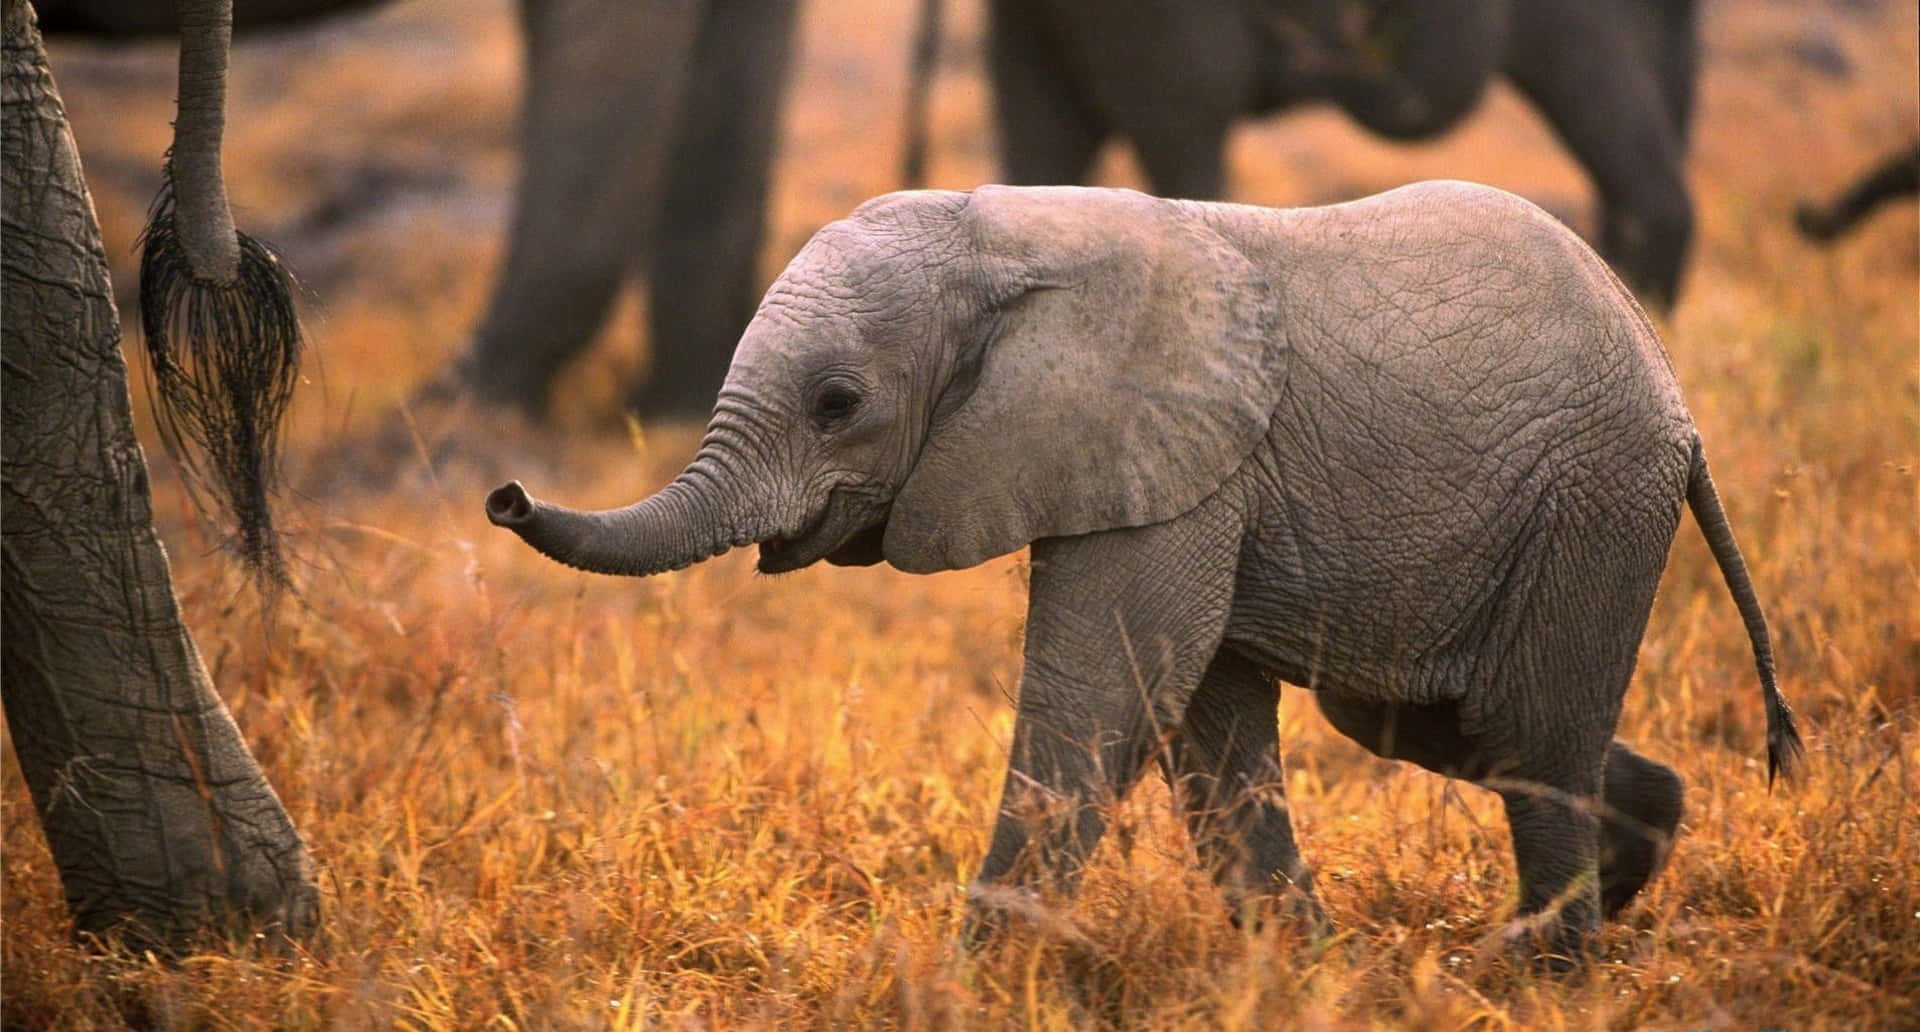 Adorable baby elephant looks up in wonder